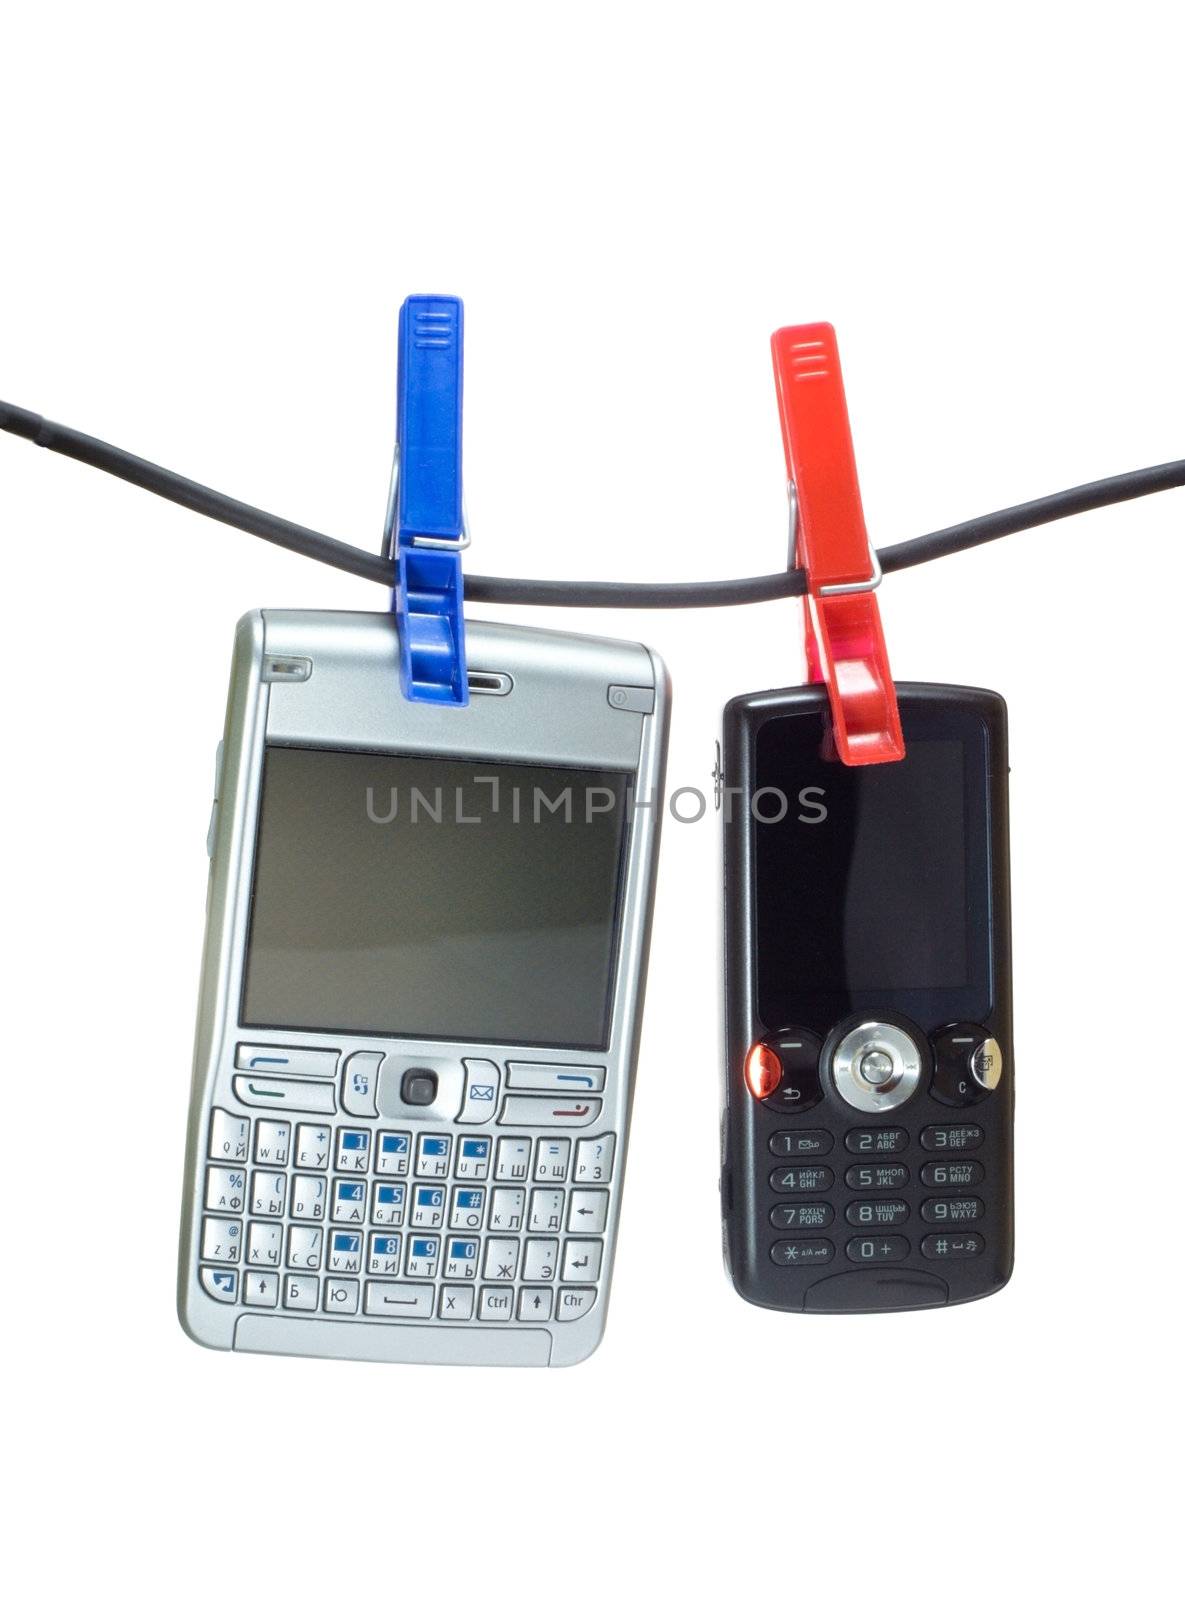 Two mobile phones on a clothes line, hanging with clothes-peg